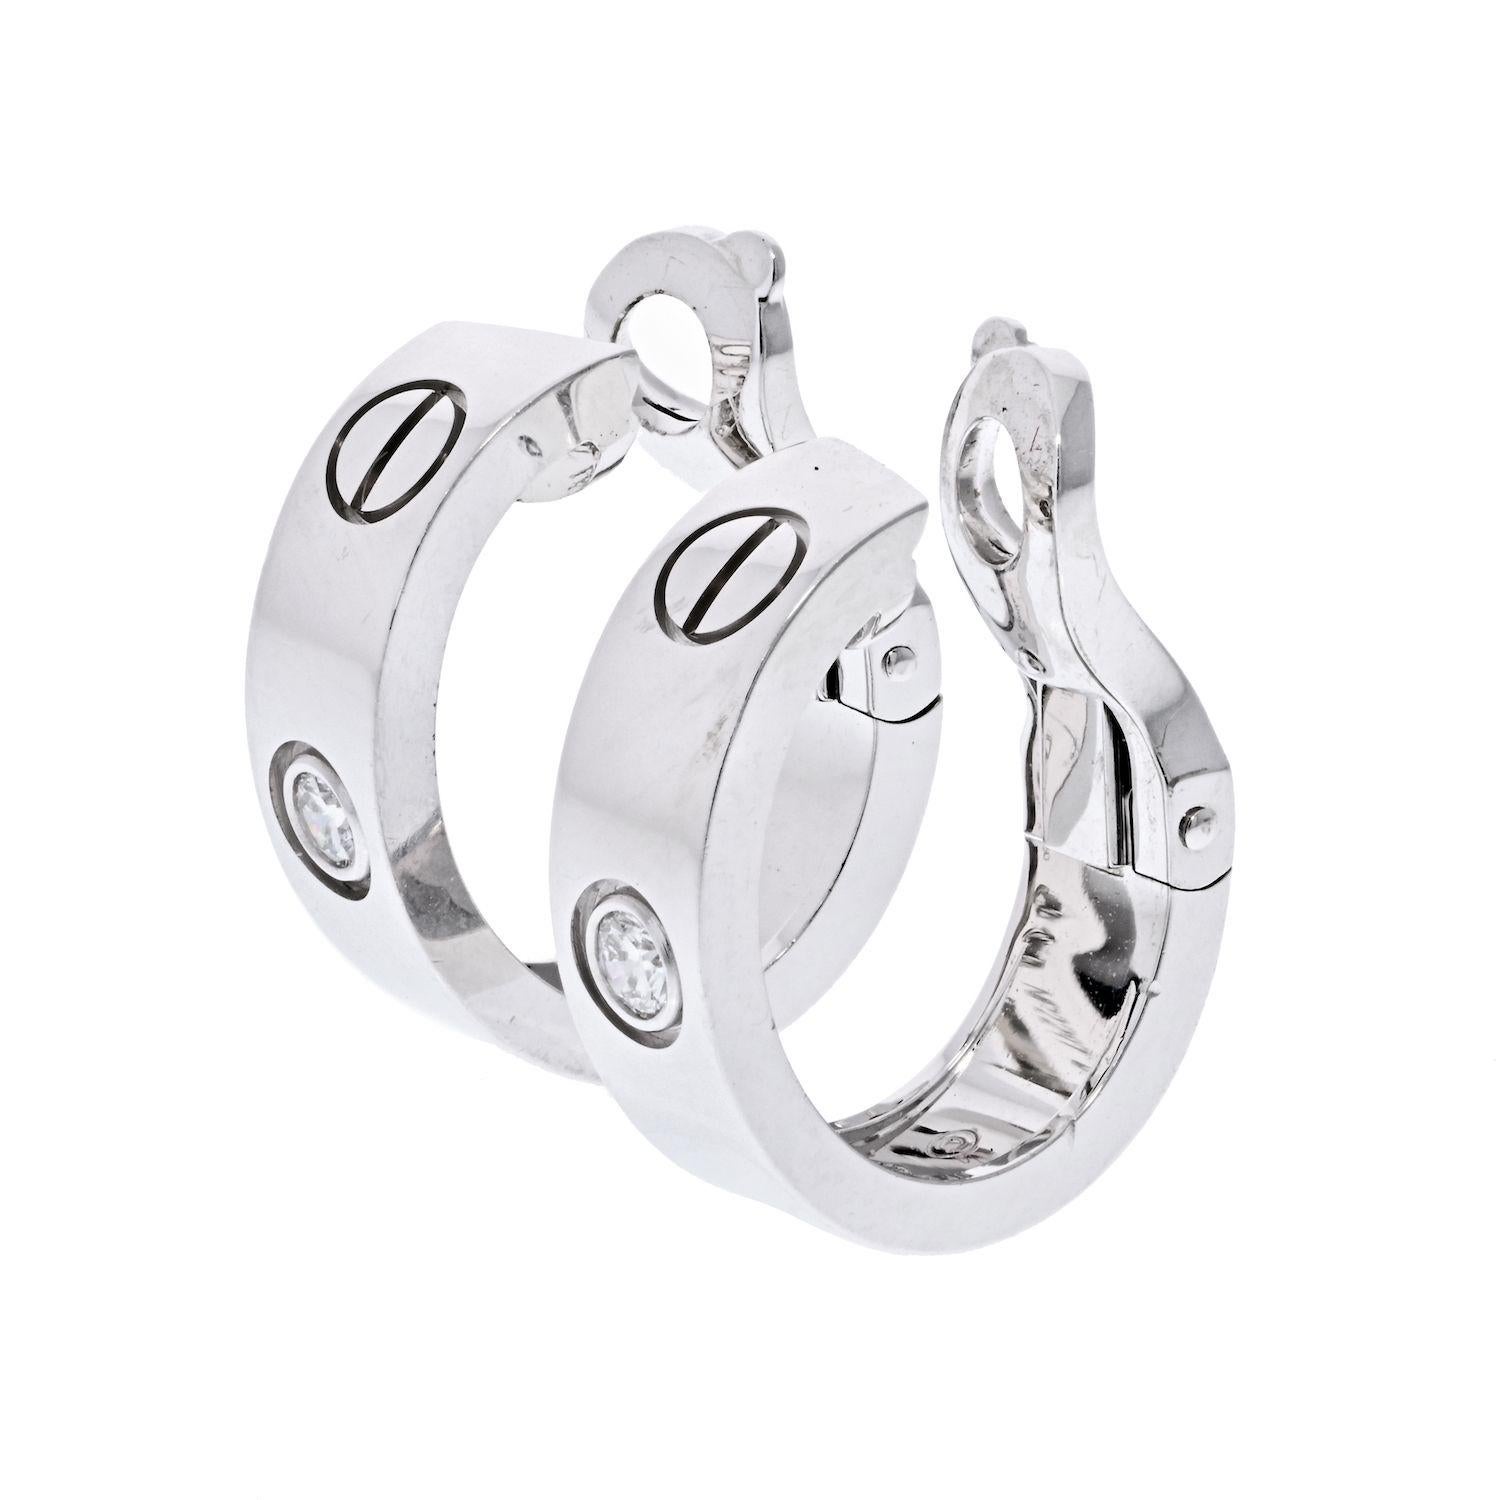 Cartier Love hoop earrings are crafted from 18k white gold and feature 2 0.15 total carat weight brilliant cut diamonds, the iconic screw motifs, and Omega backings.
W: 5.7mm